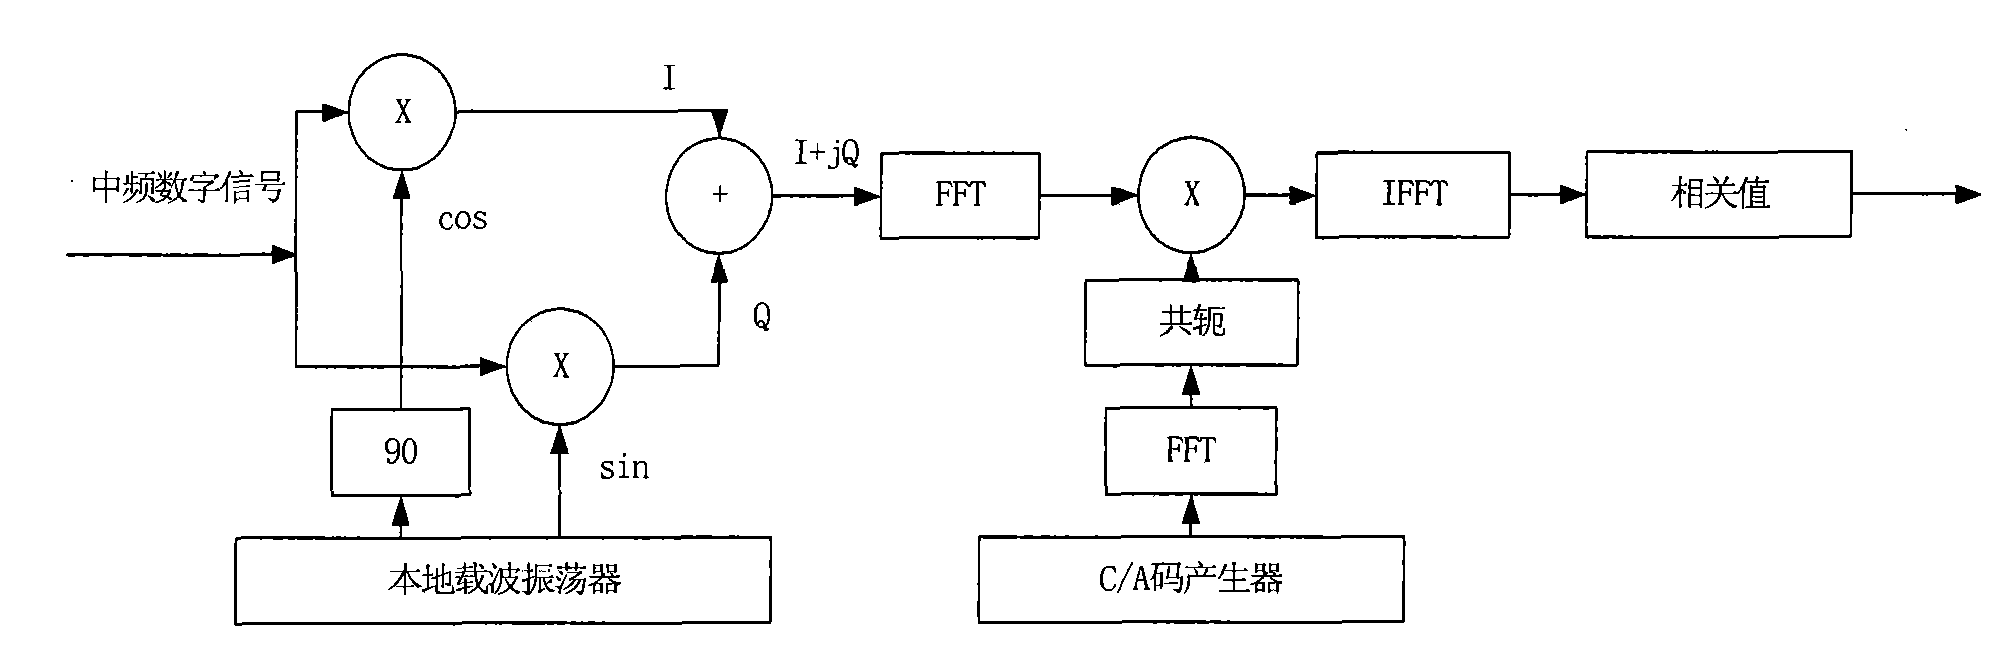 Signal acquisition method of GPS receiver